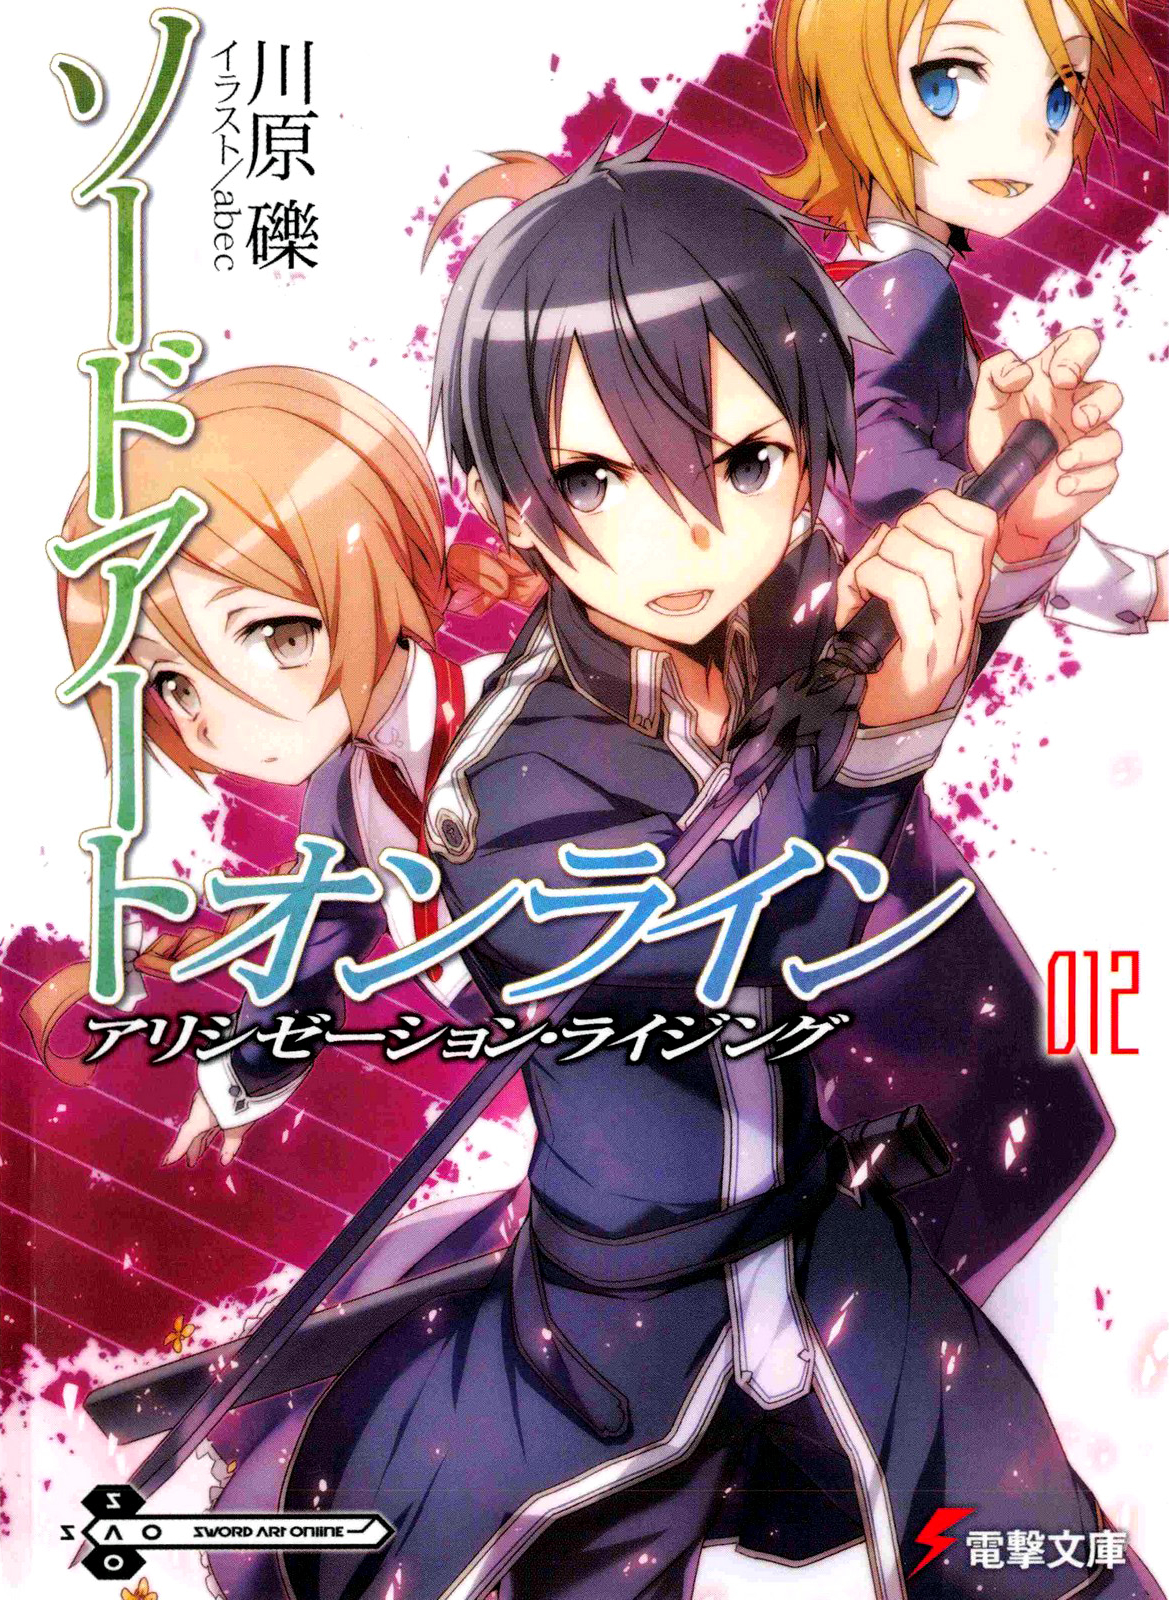 Front cover of Sword Art Online Vol 12: Alizication Rising. With two more... uhh... girls for Kirito.